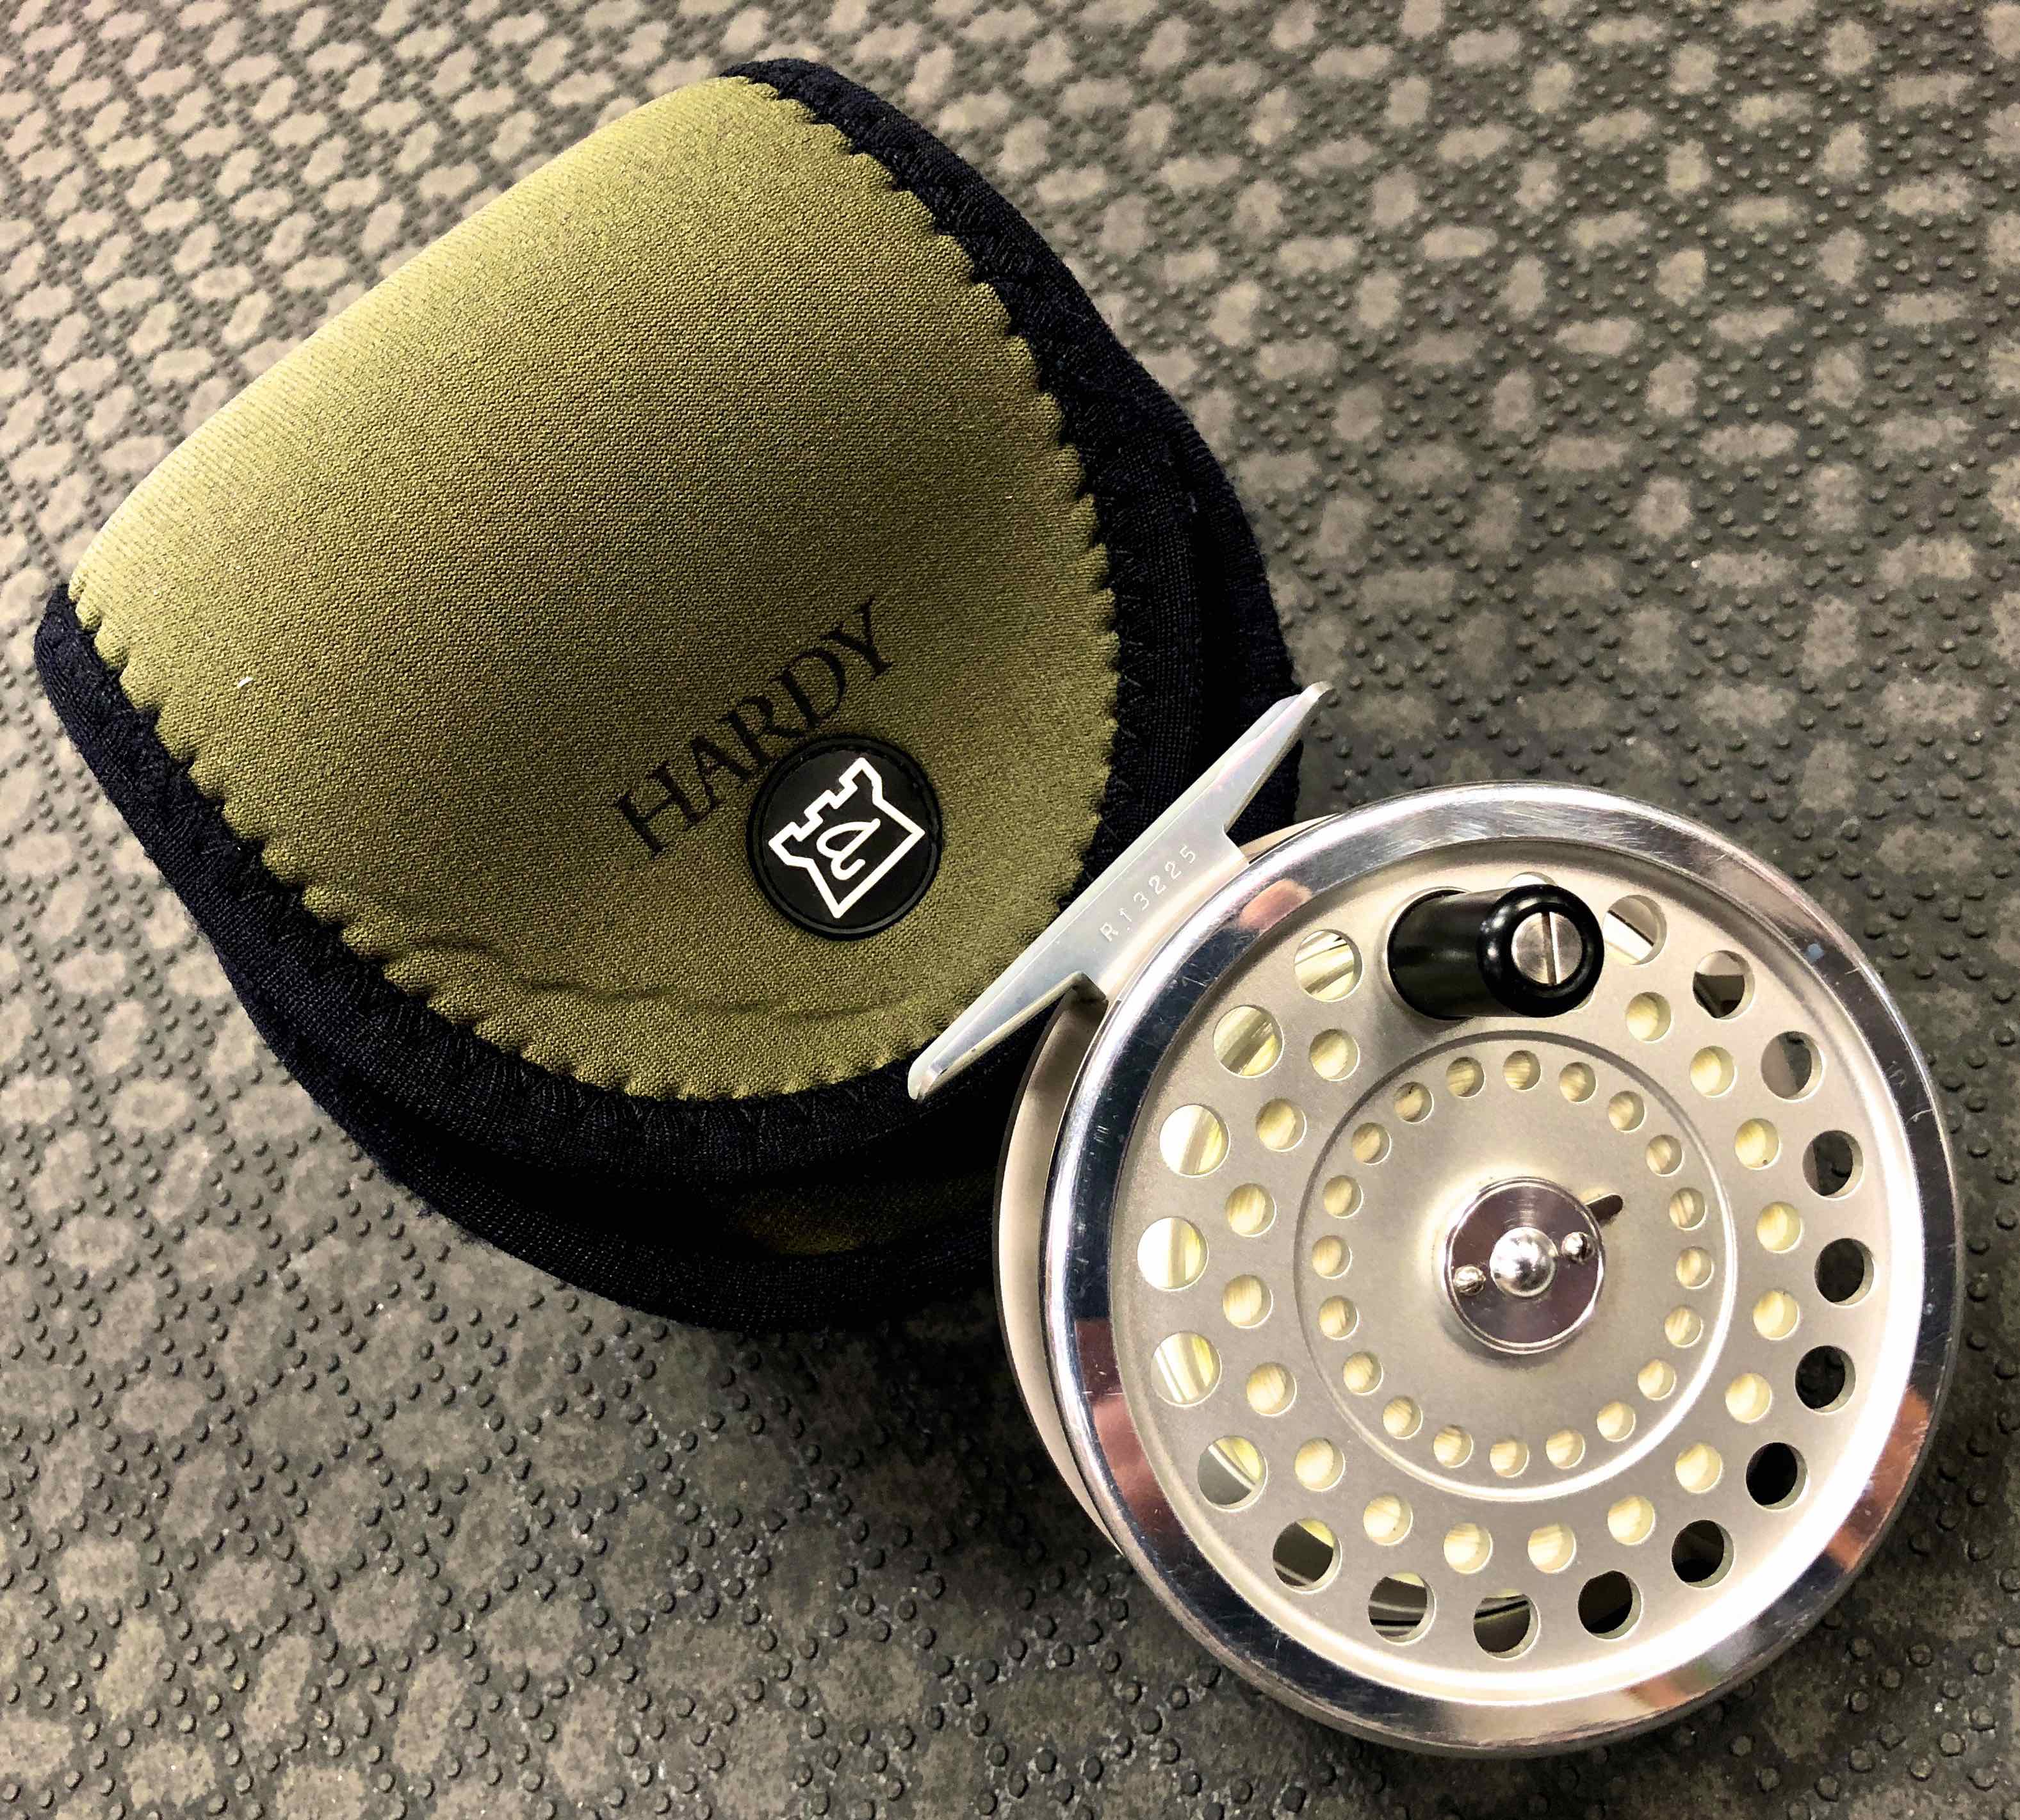 SOLD! – NEW PRICE! – Hardy Marquis Salmon No. 1 Spey / Switch Reel